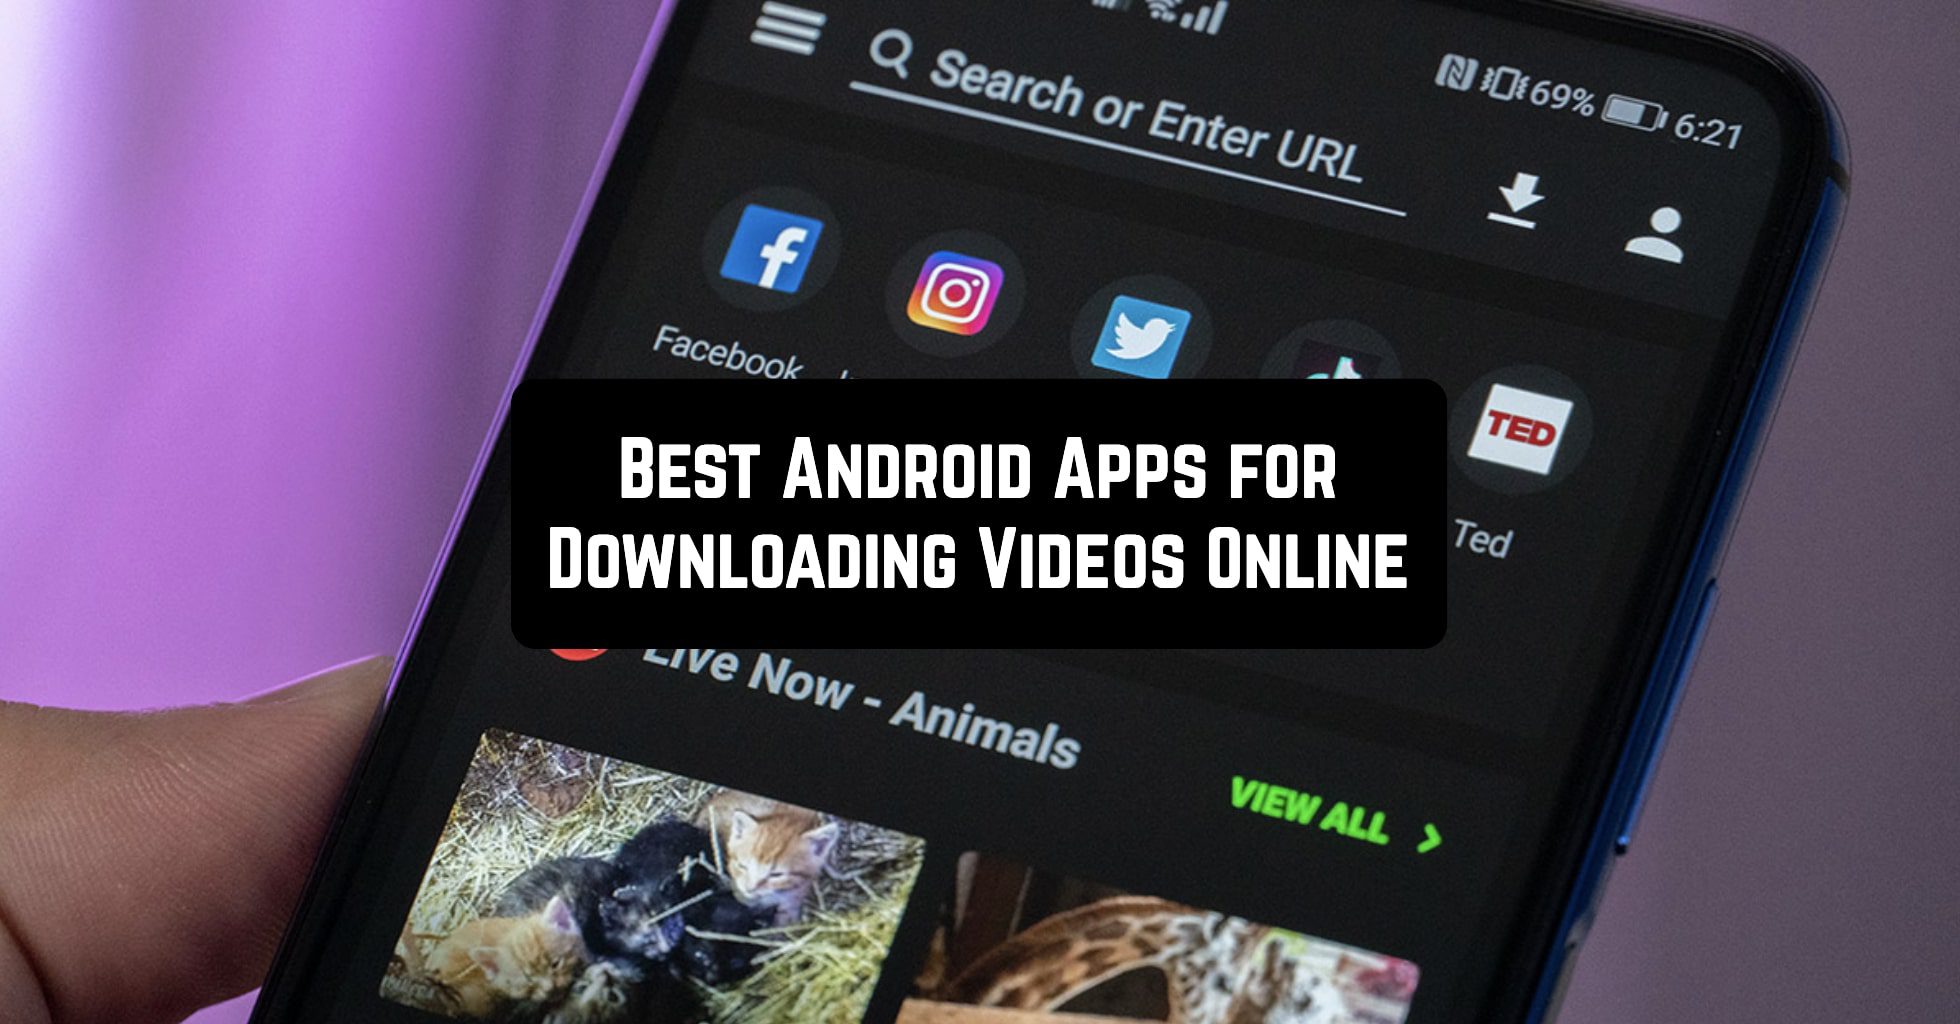 Best Android Apps for Downloading Videos Online